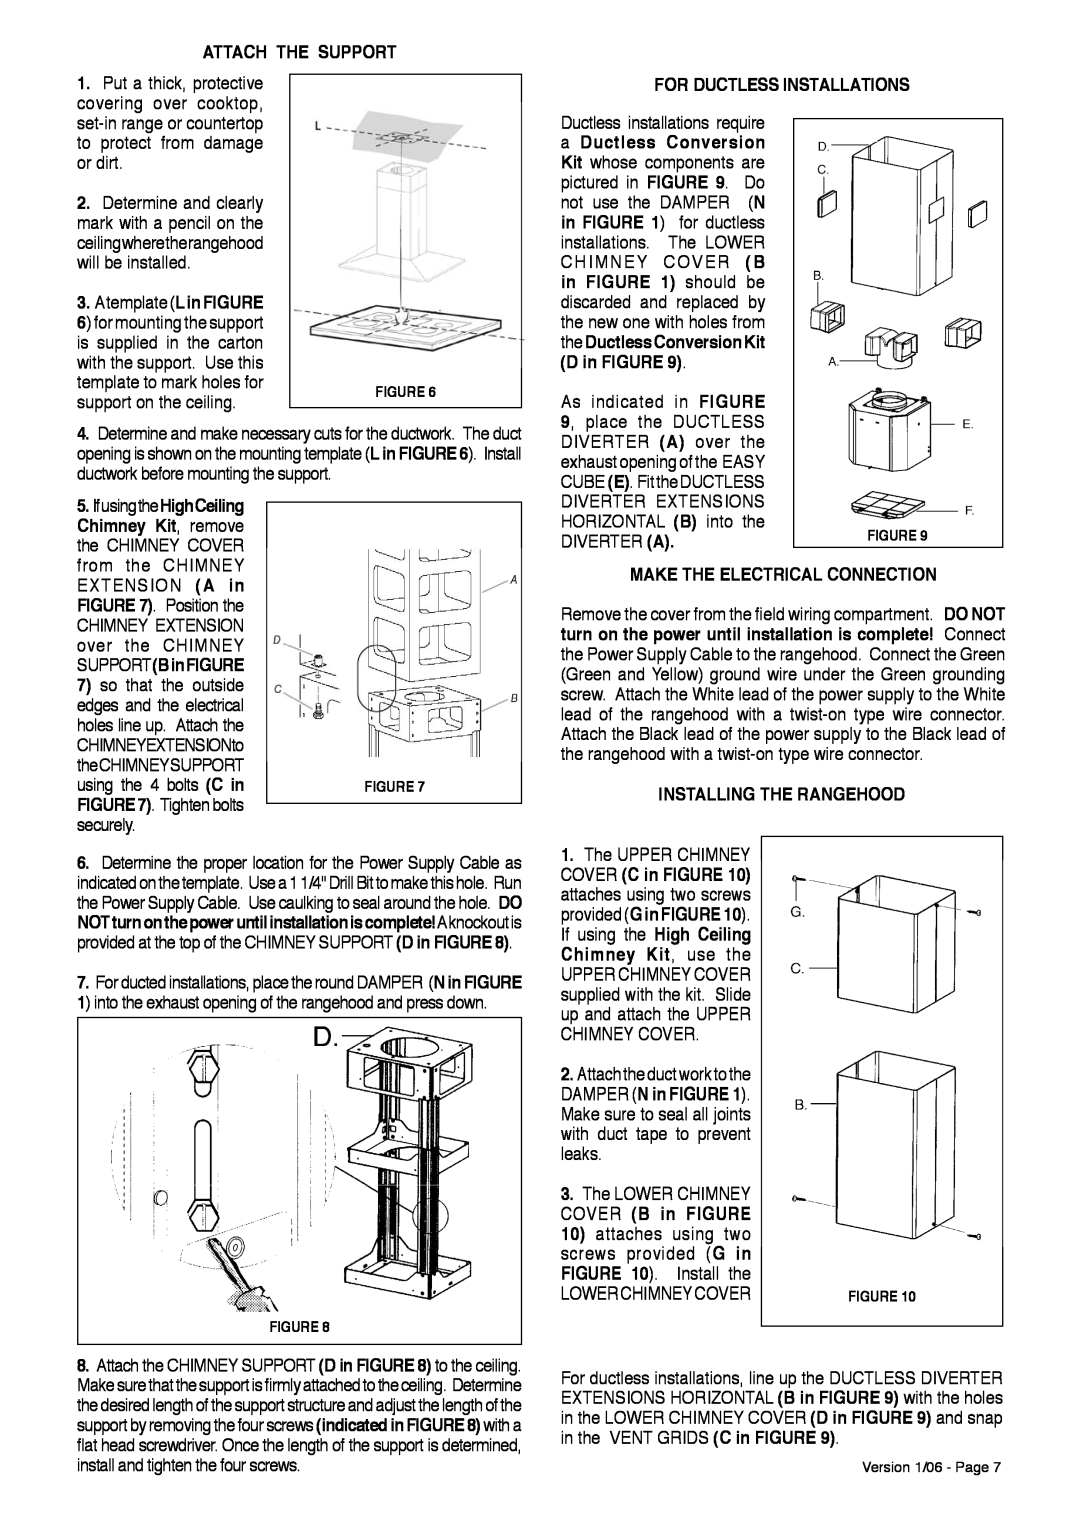 Faber Dama Isola installation instructions Attach The Support 